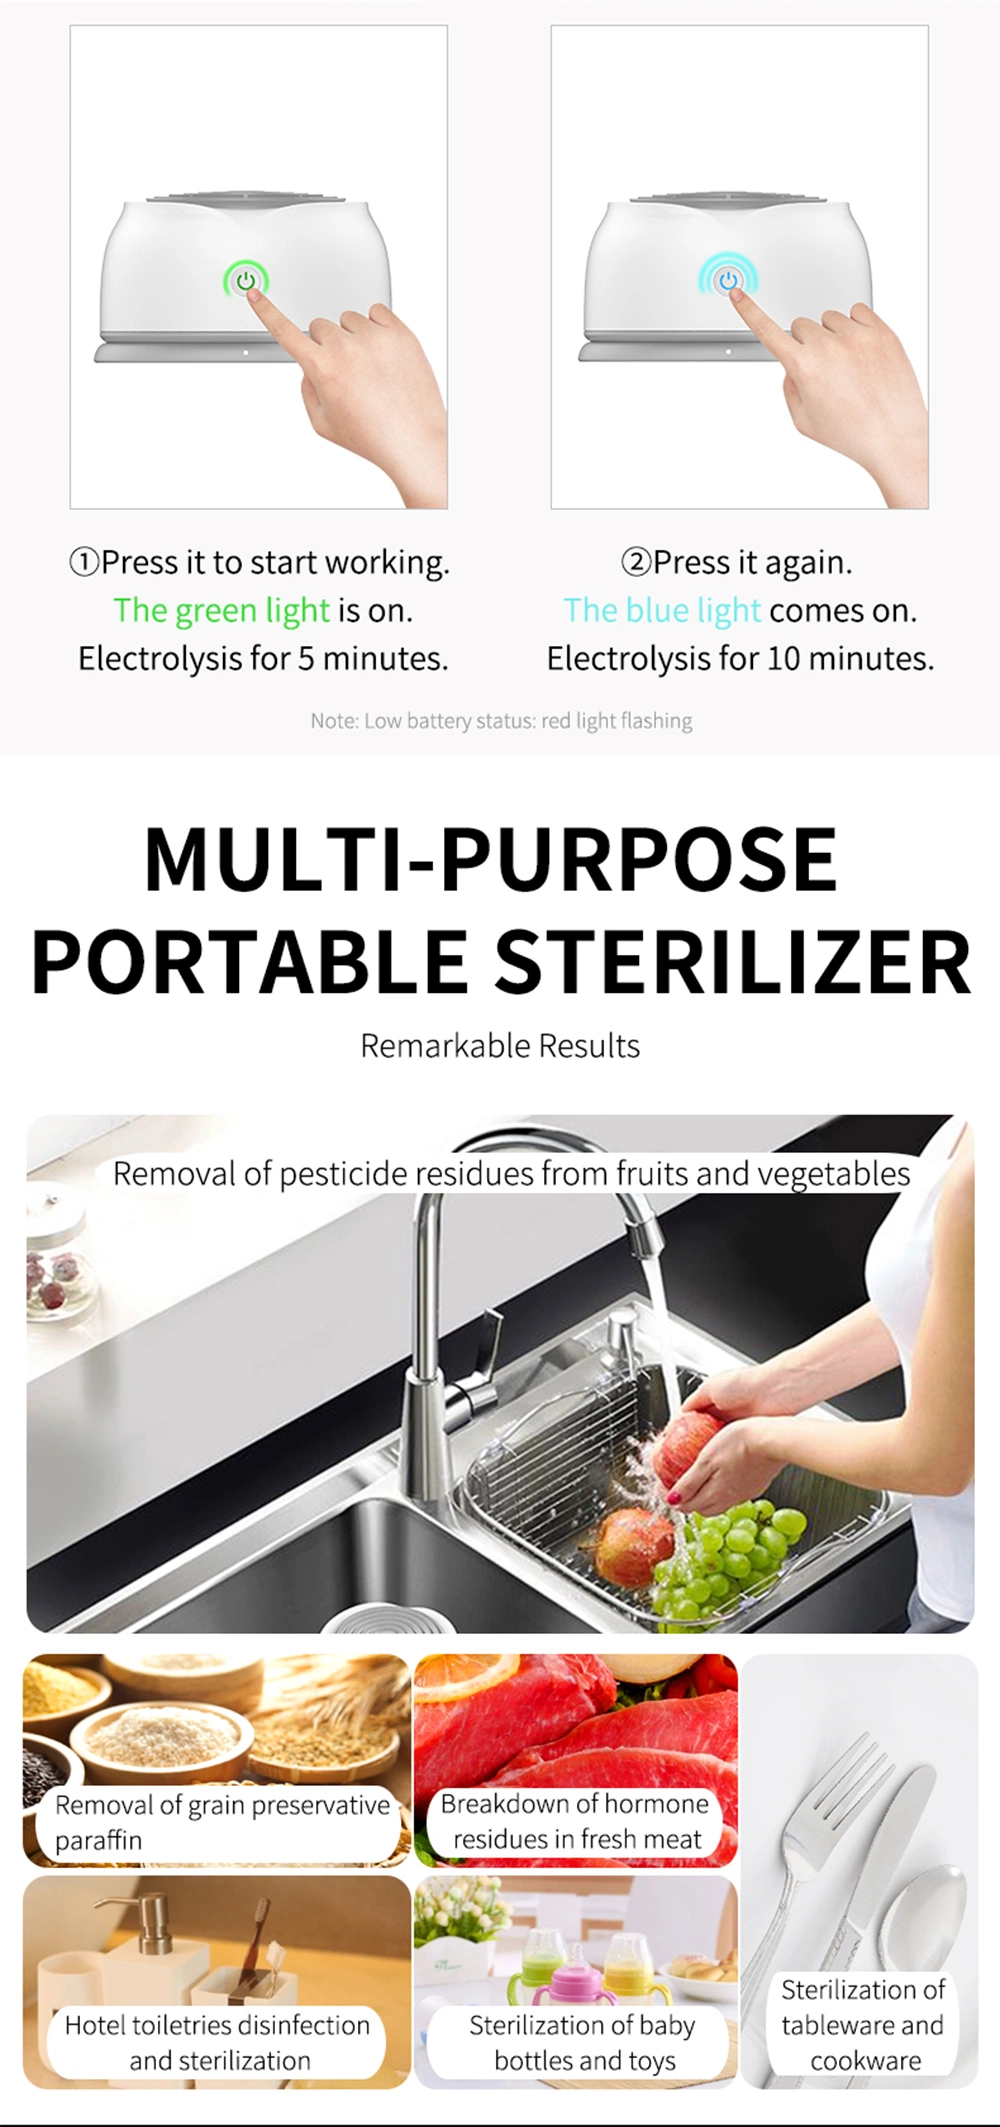 Remove Pesticide Residues Fruit Cleaner and Sterilizer Olansi Portable C5a Fruit and Vegetable Washer Machine Ozone